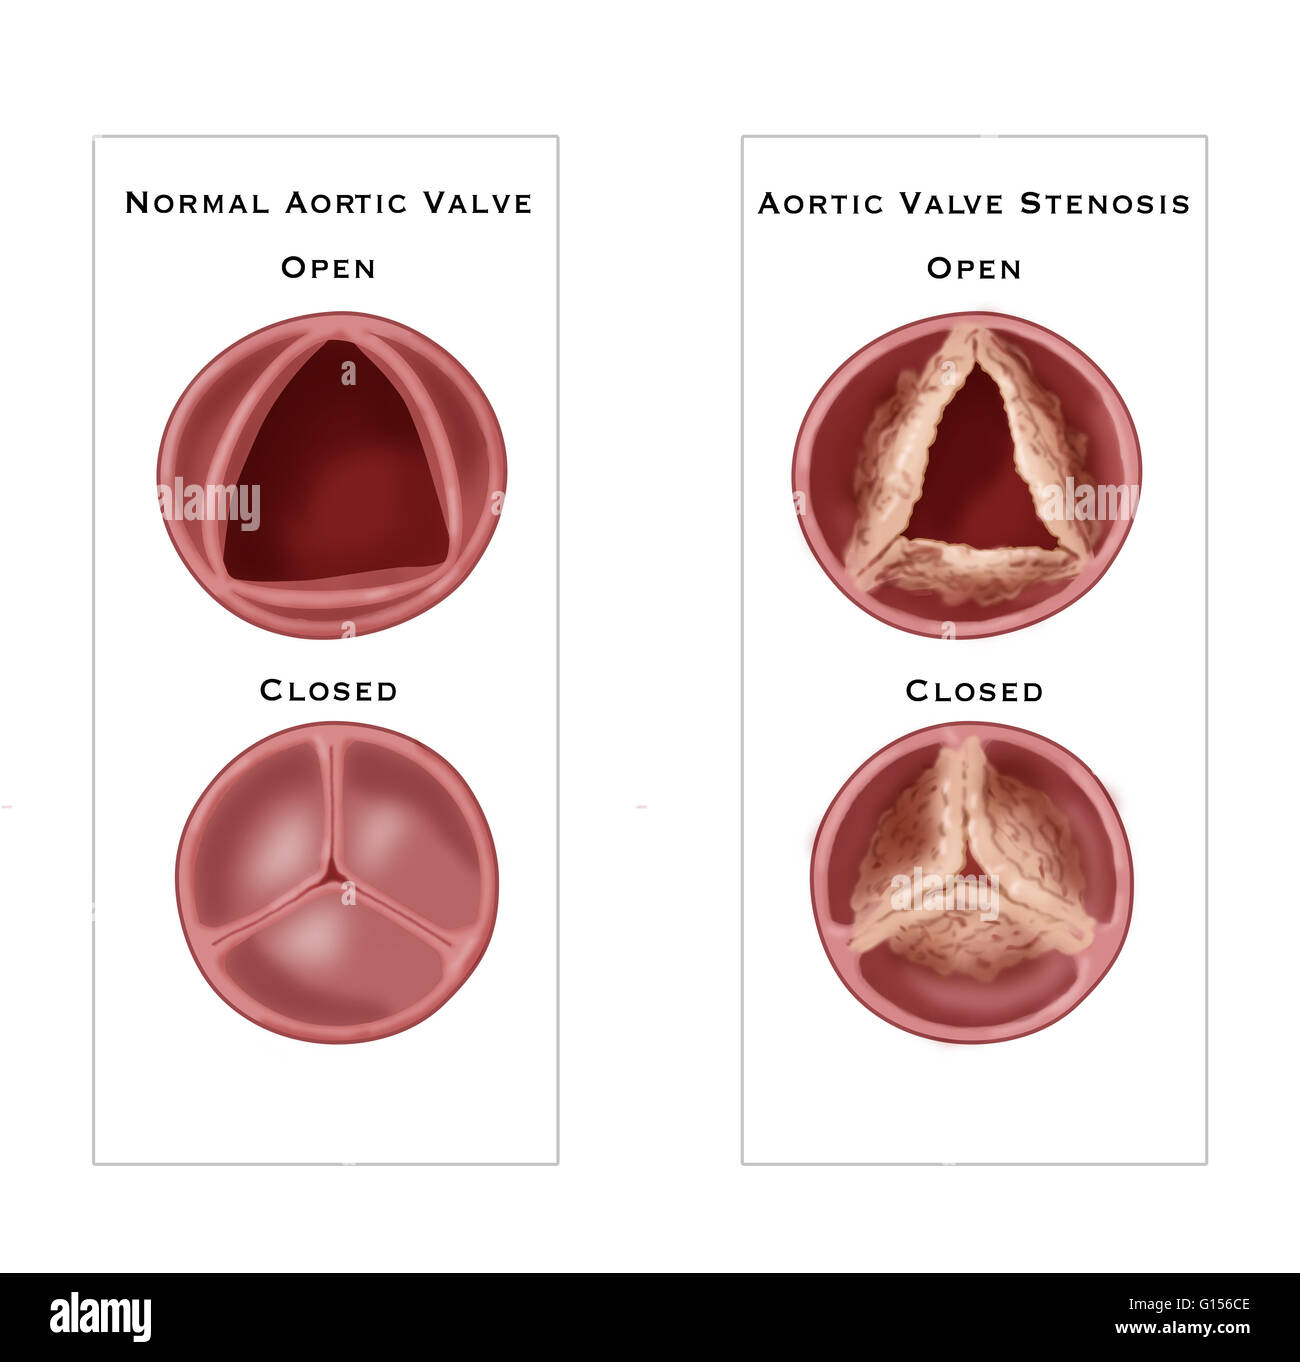 Illustration Comparing A Normal Aortic Valve Left To Aortic Valve